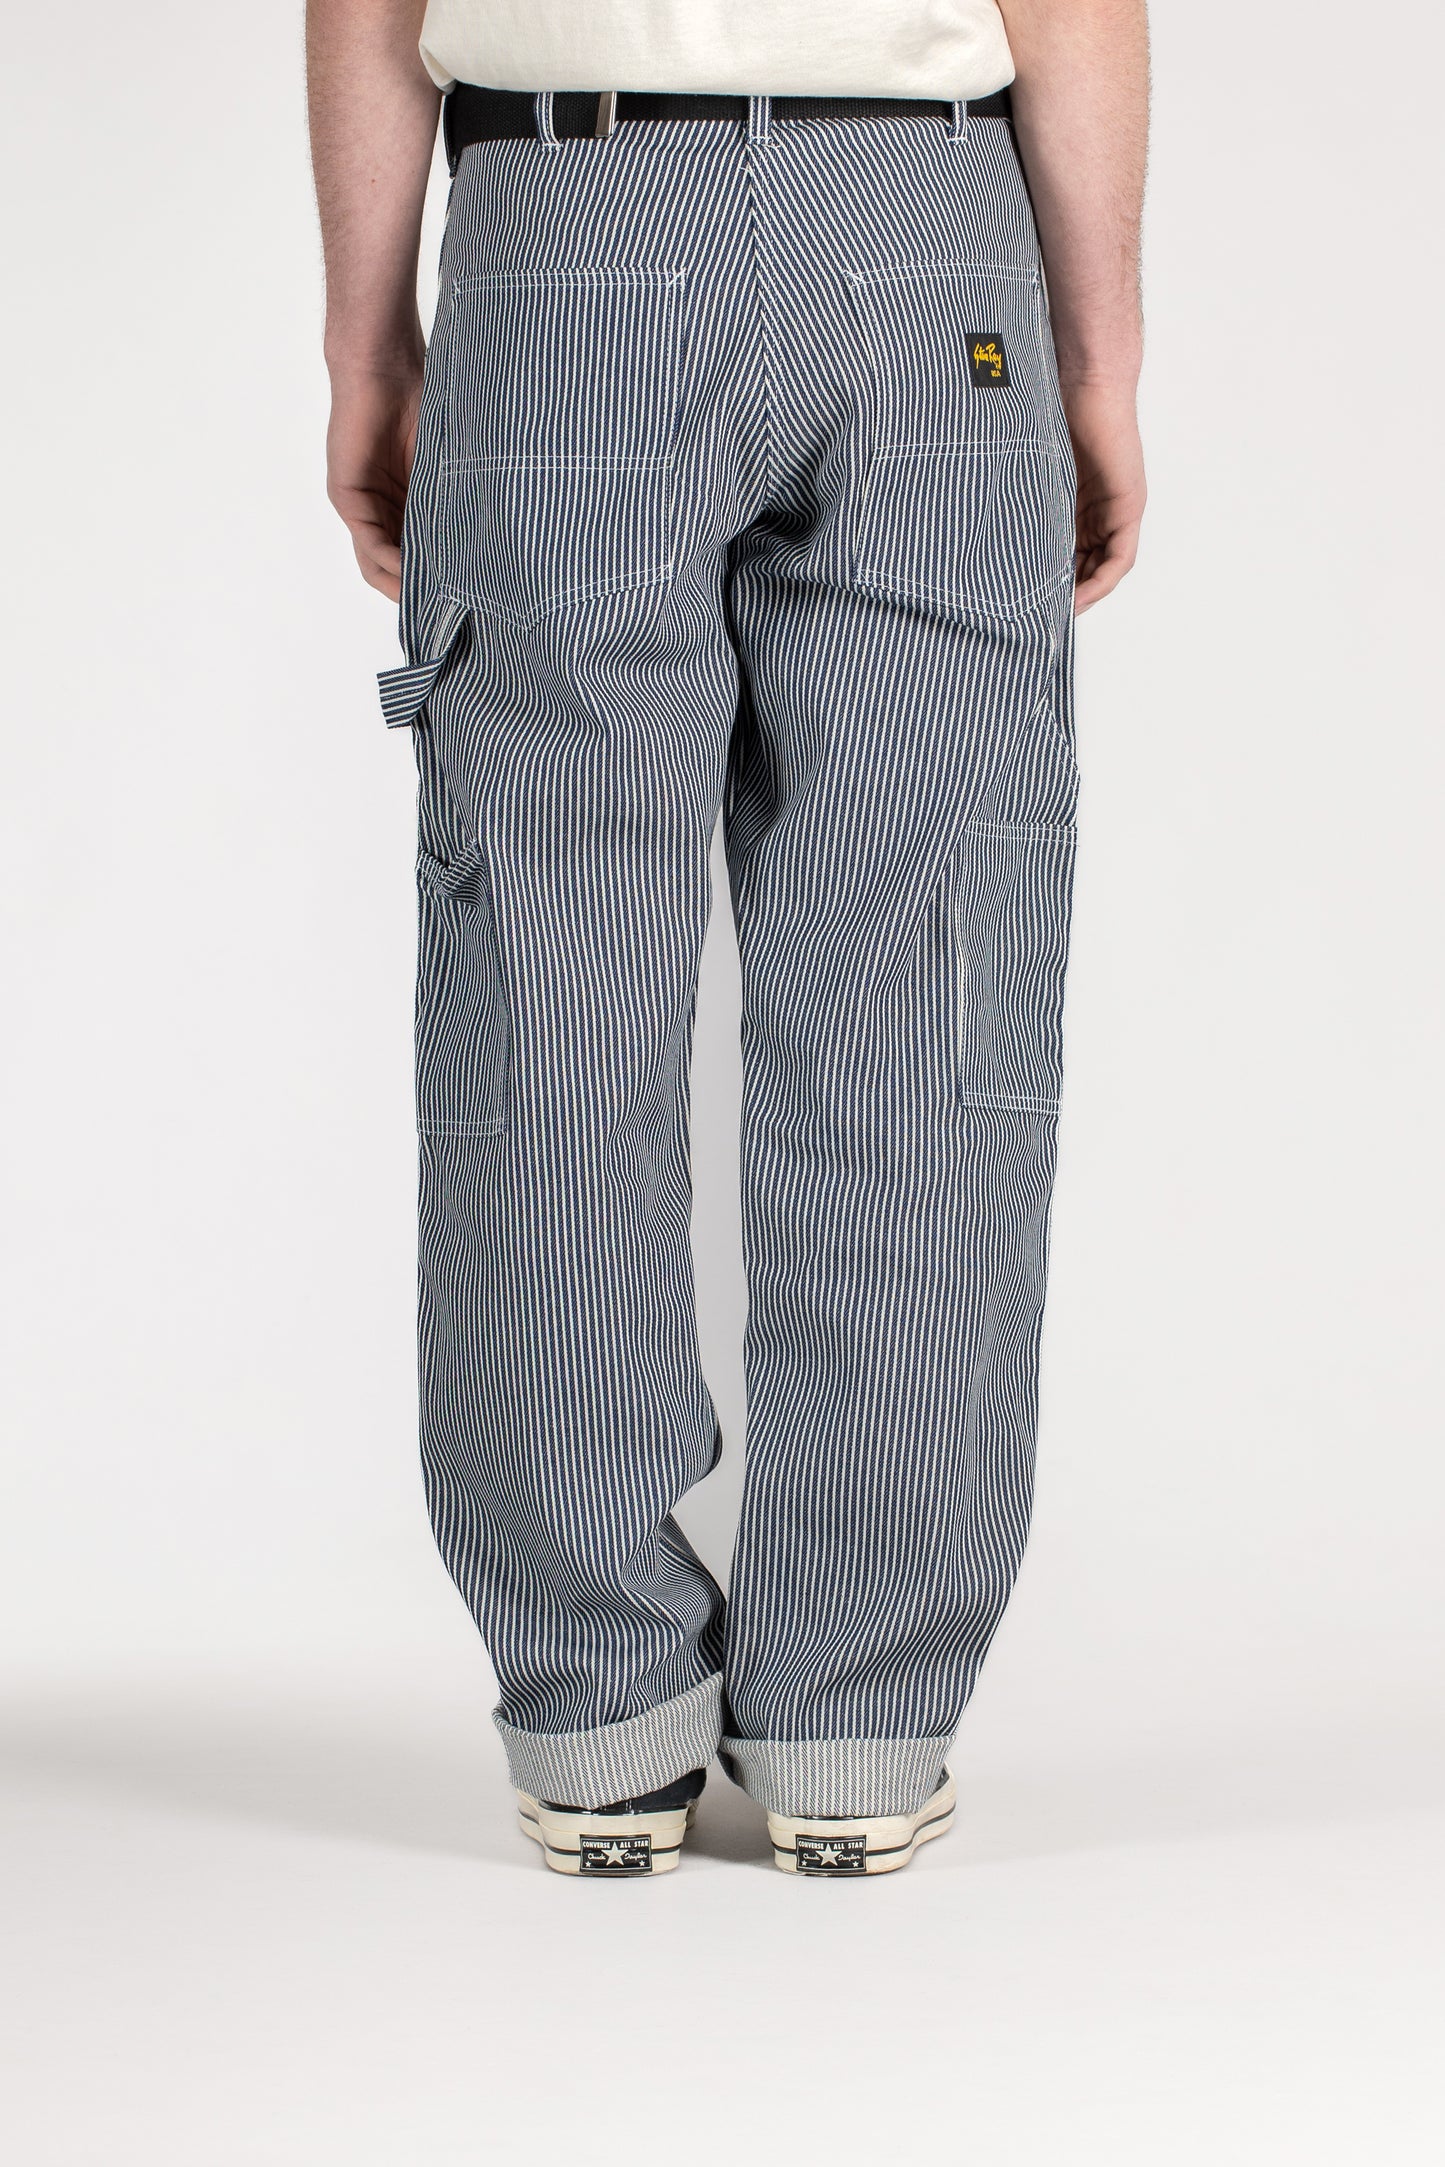 Double Knee Painter Pant (Hickory Stripe)